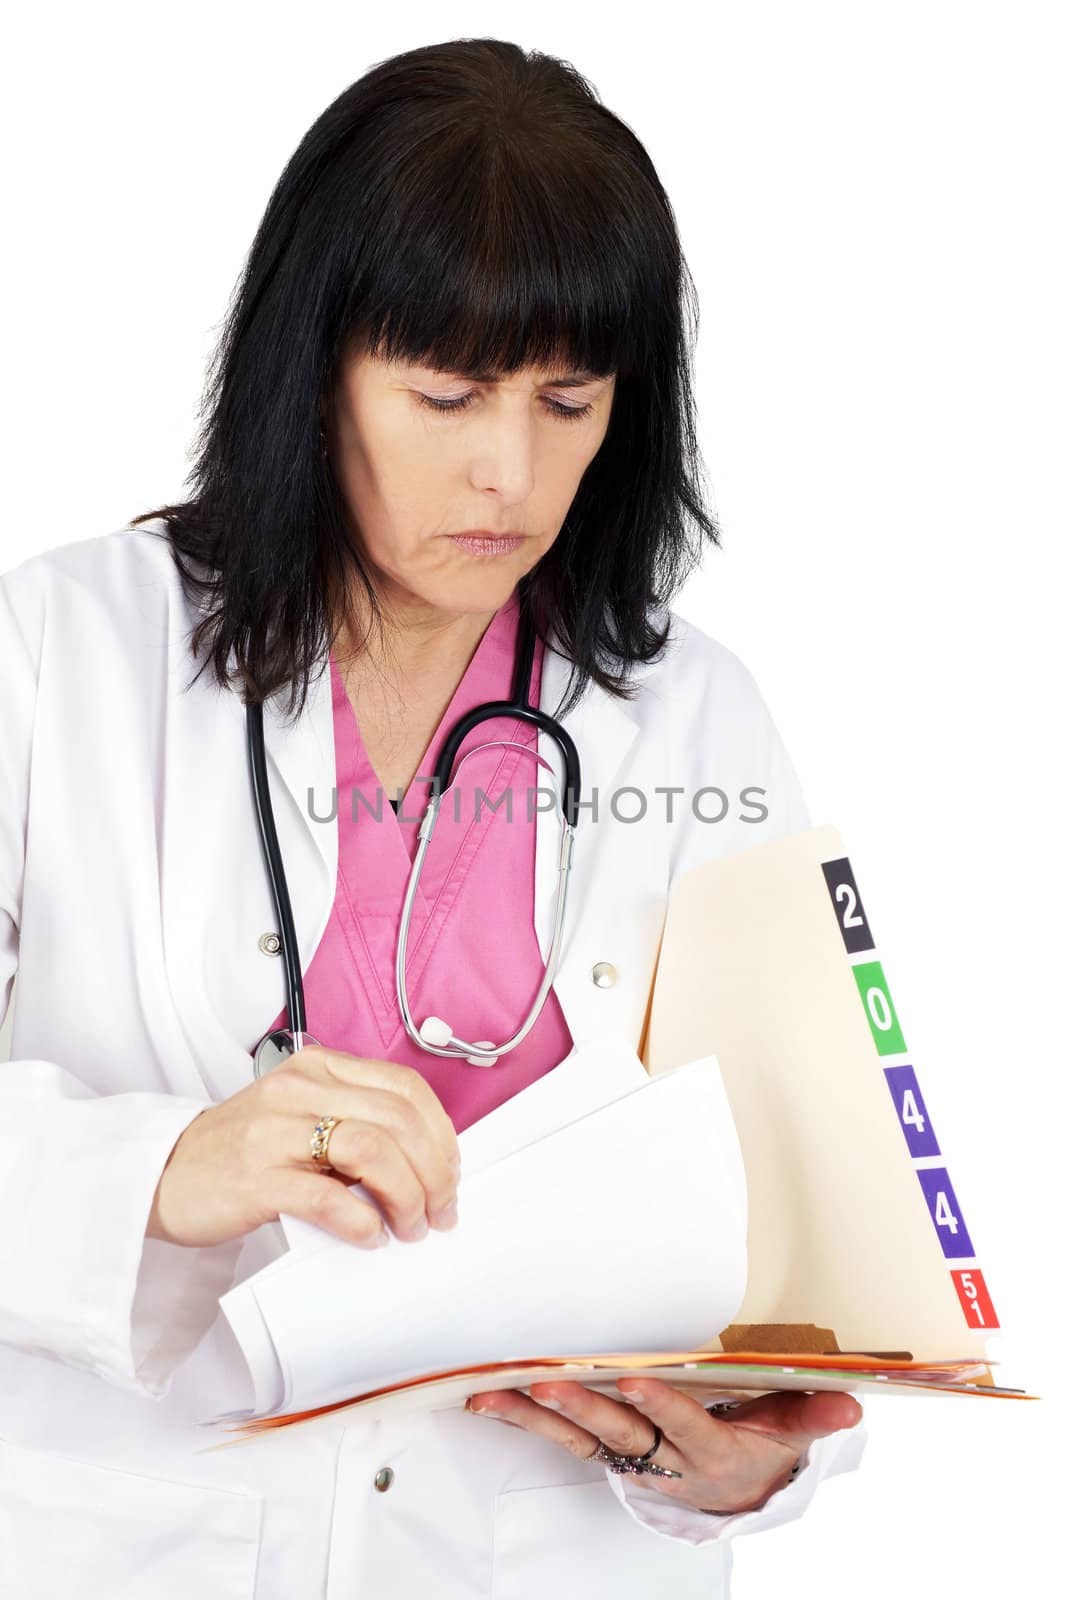 Doctor looking at medical file